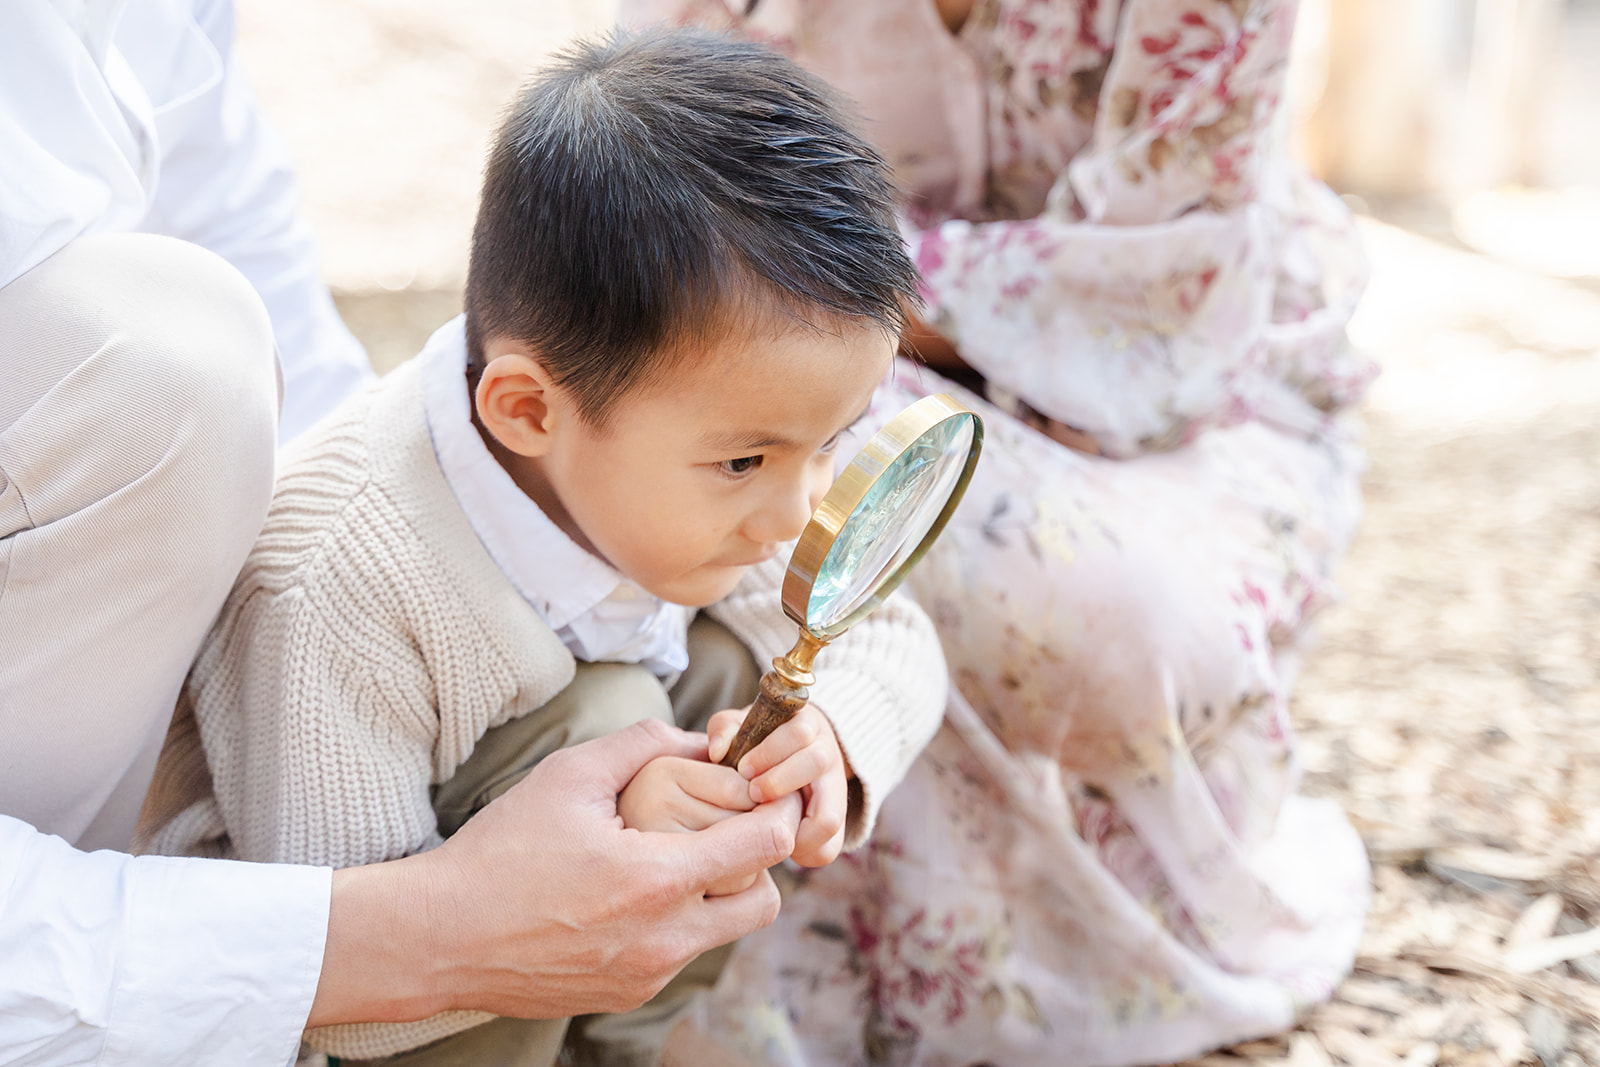 A young boy looks through a magnifying glass with help from mom and dad in a park